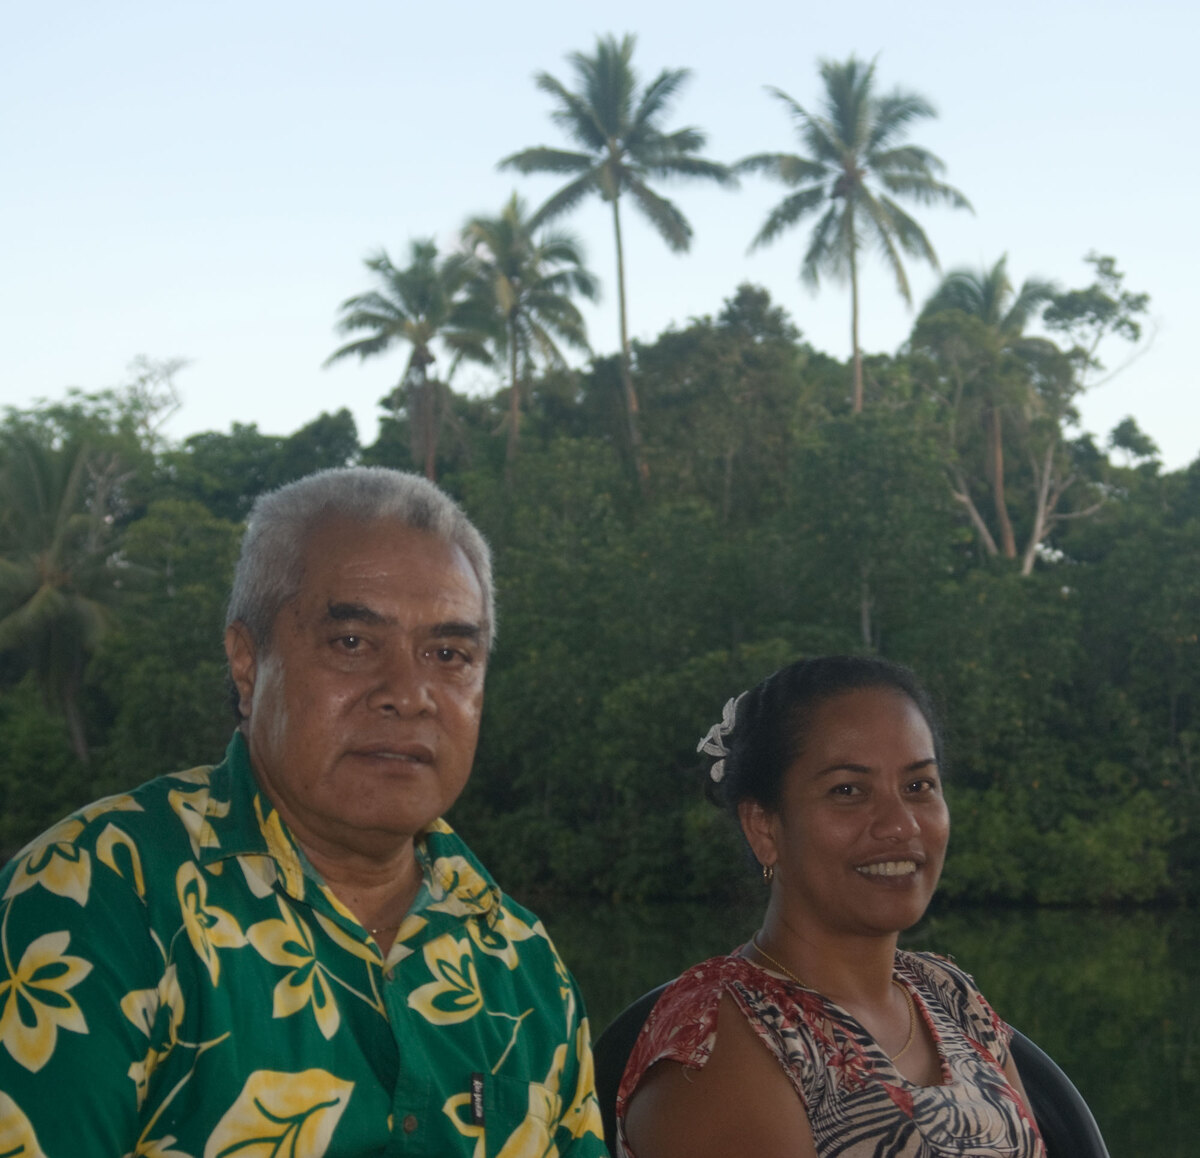 After the initial day of presentations, members of the regional delegation were invited by the Pacific Institute of Public Policy to spend a quiet evening relaxing at Hannington's nakamal on the Second Lagoon.
